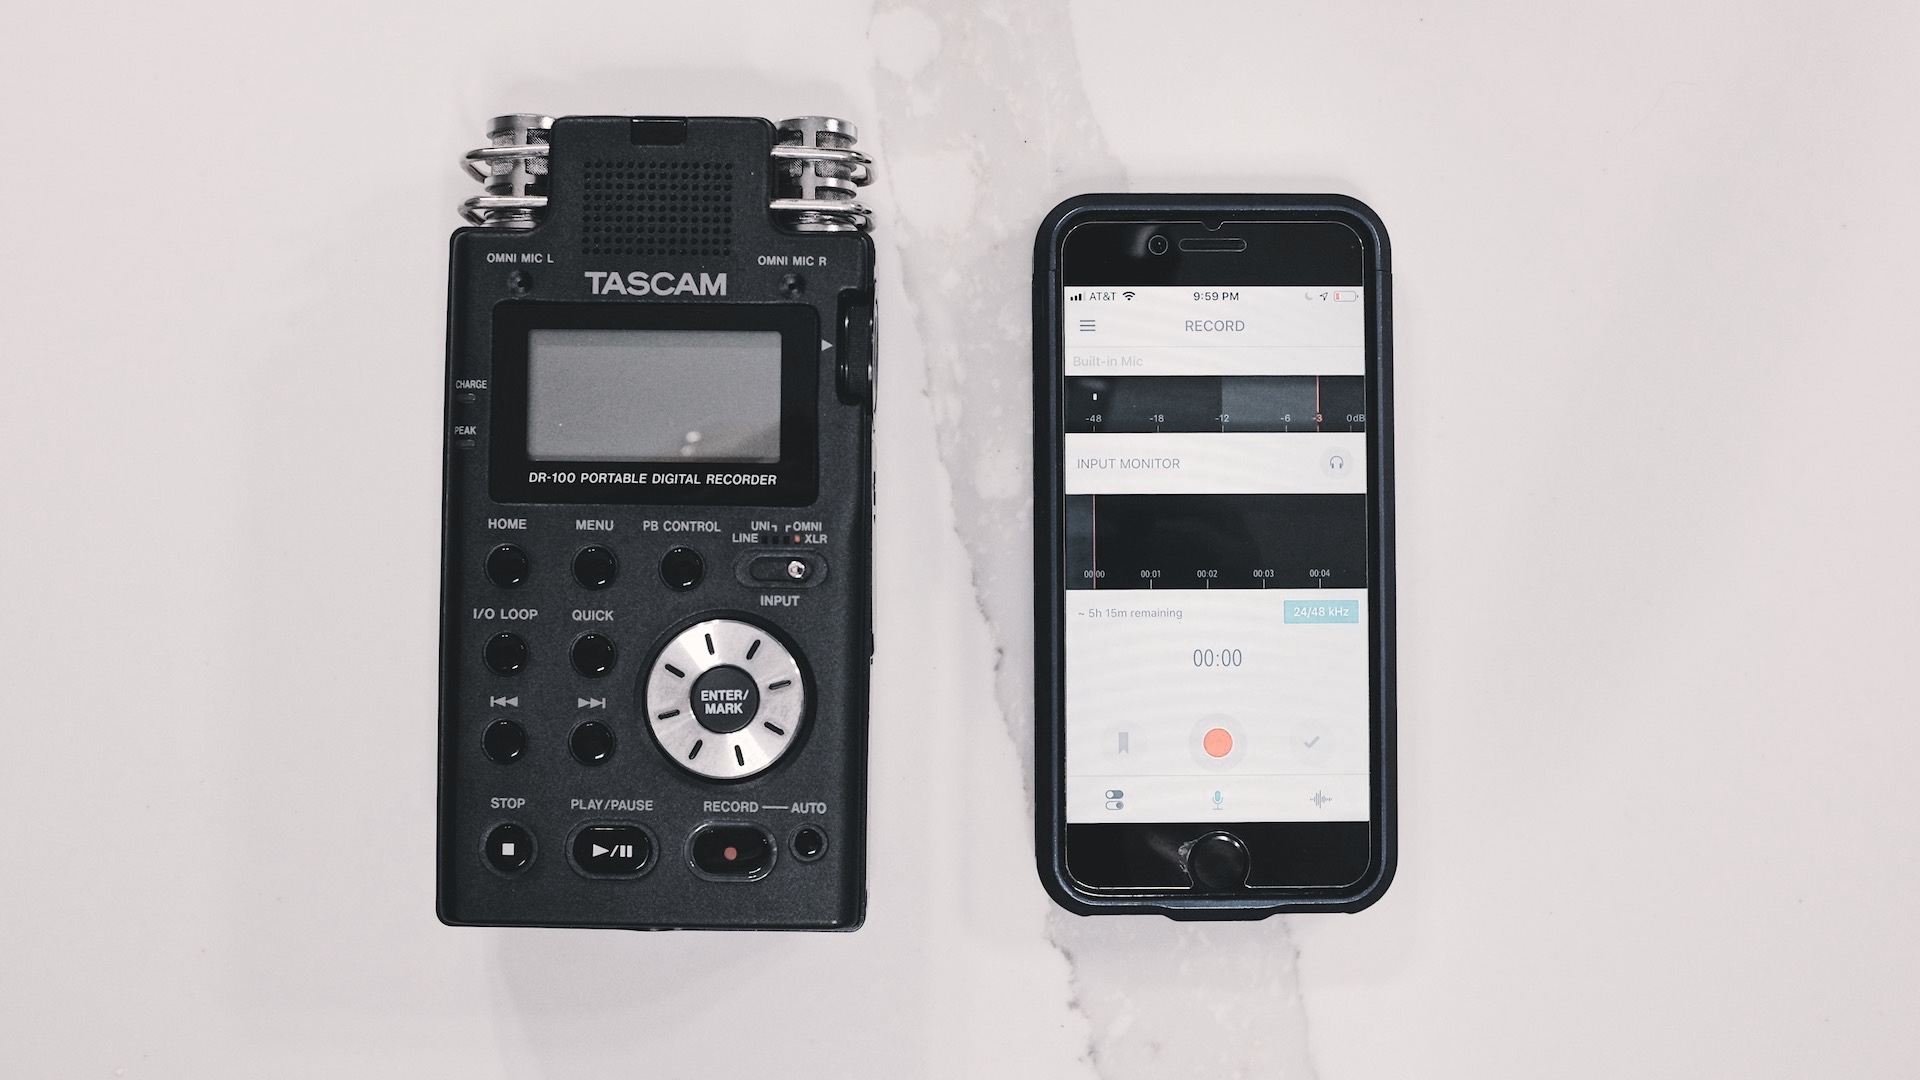 A dedicated audio field recorder compared to the iPhone.